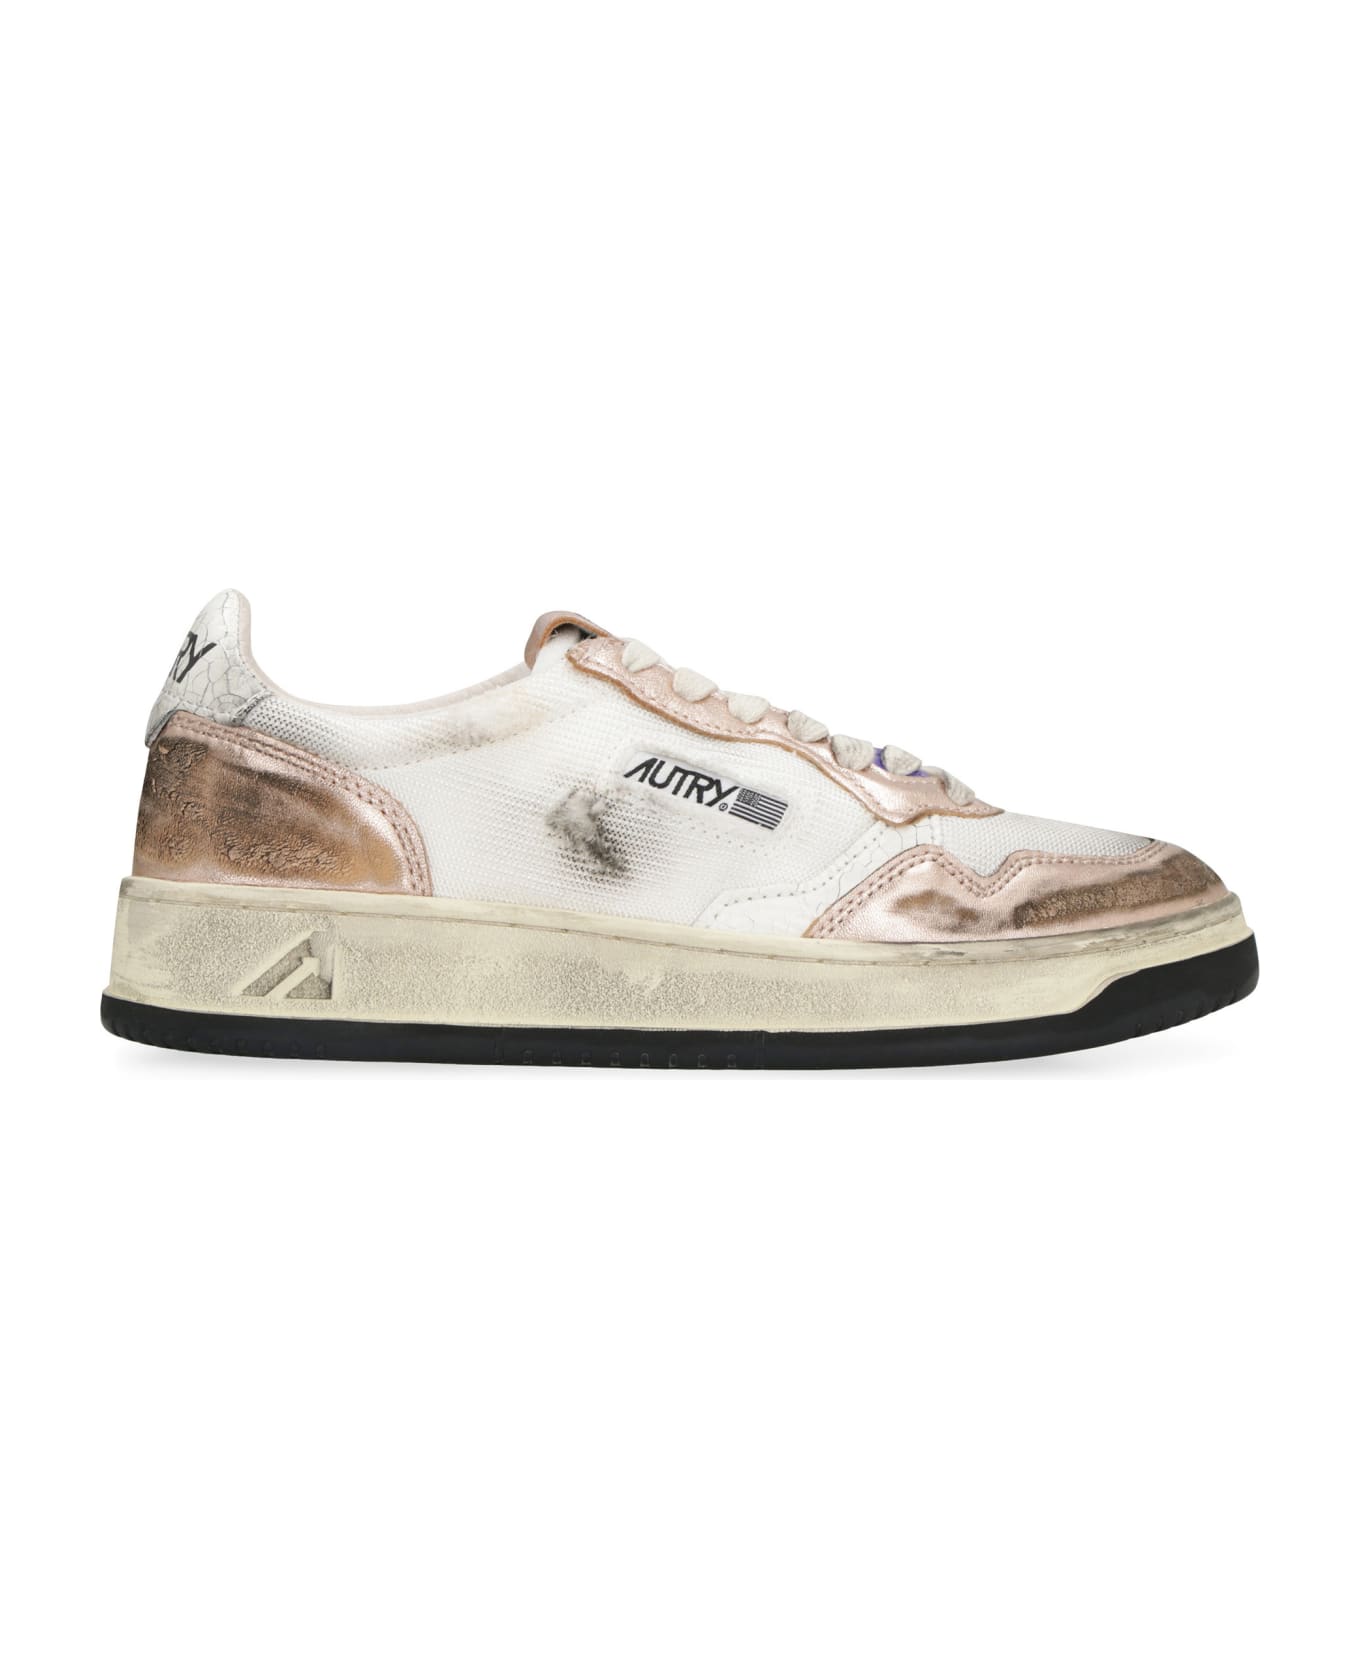 Autry Super Vintage Medalist Low Sneakers In White And Gold Leather - Bronze